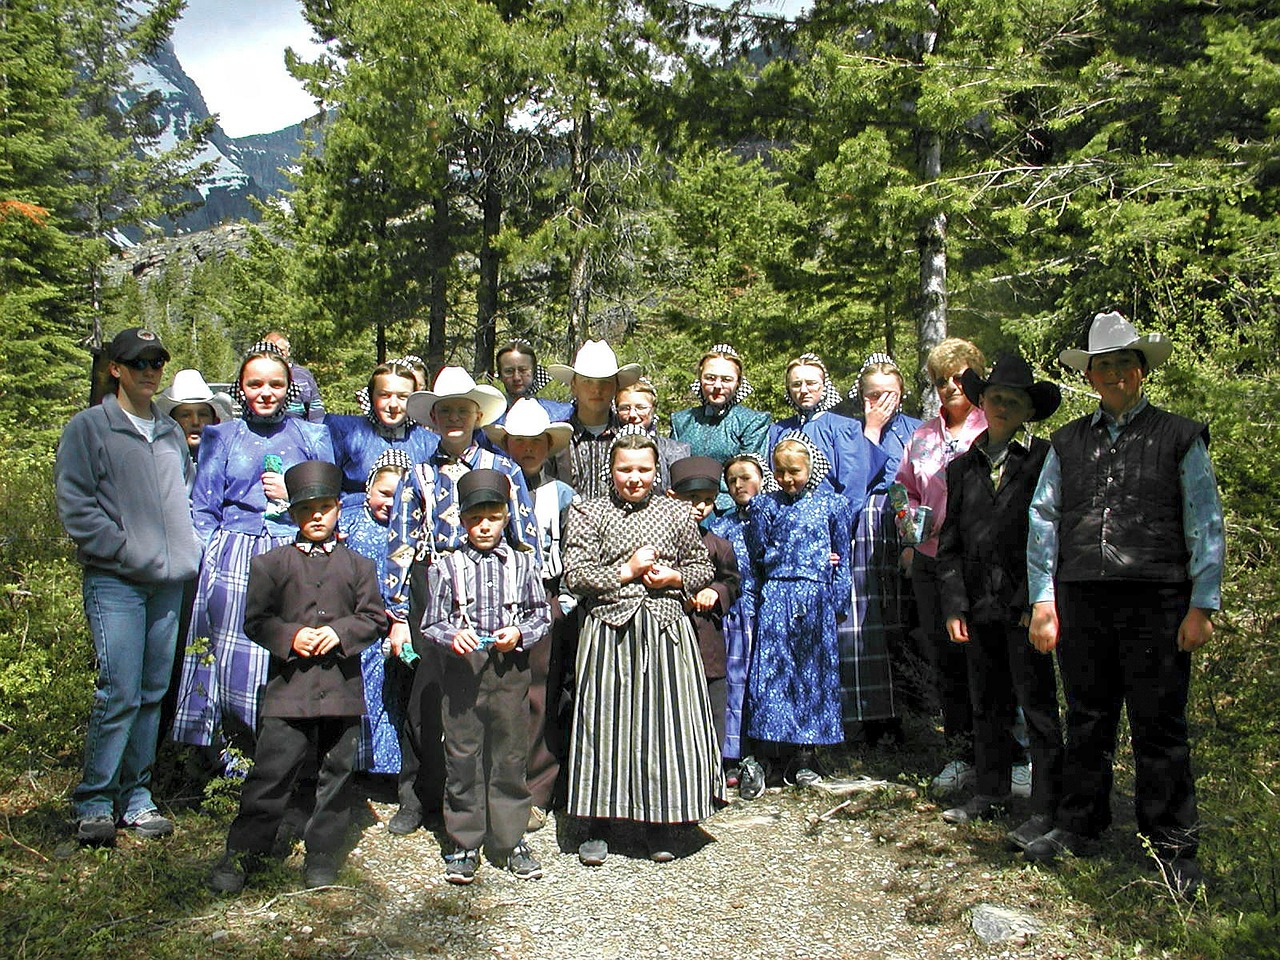 Canadian Family in Traditional Clothing | Canada Immigration Express